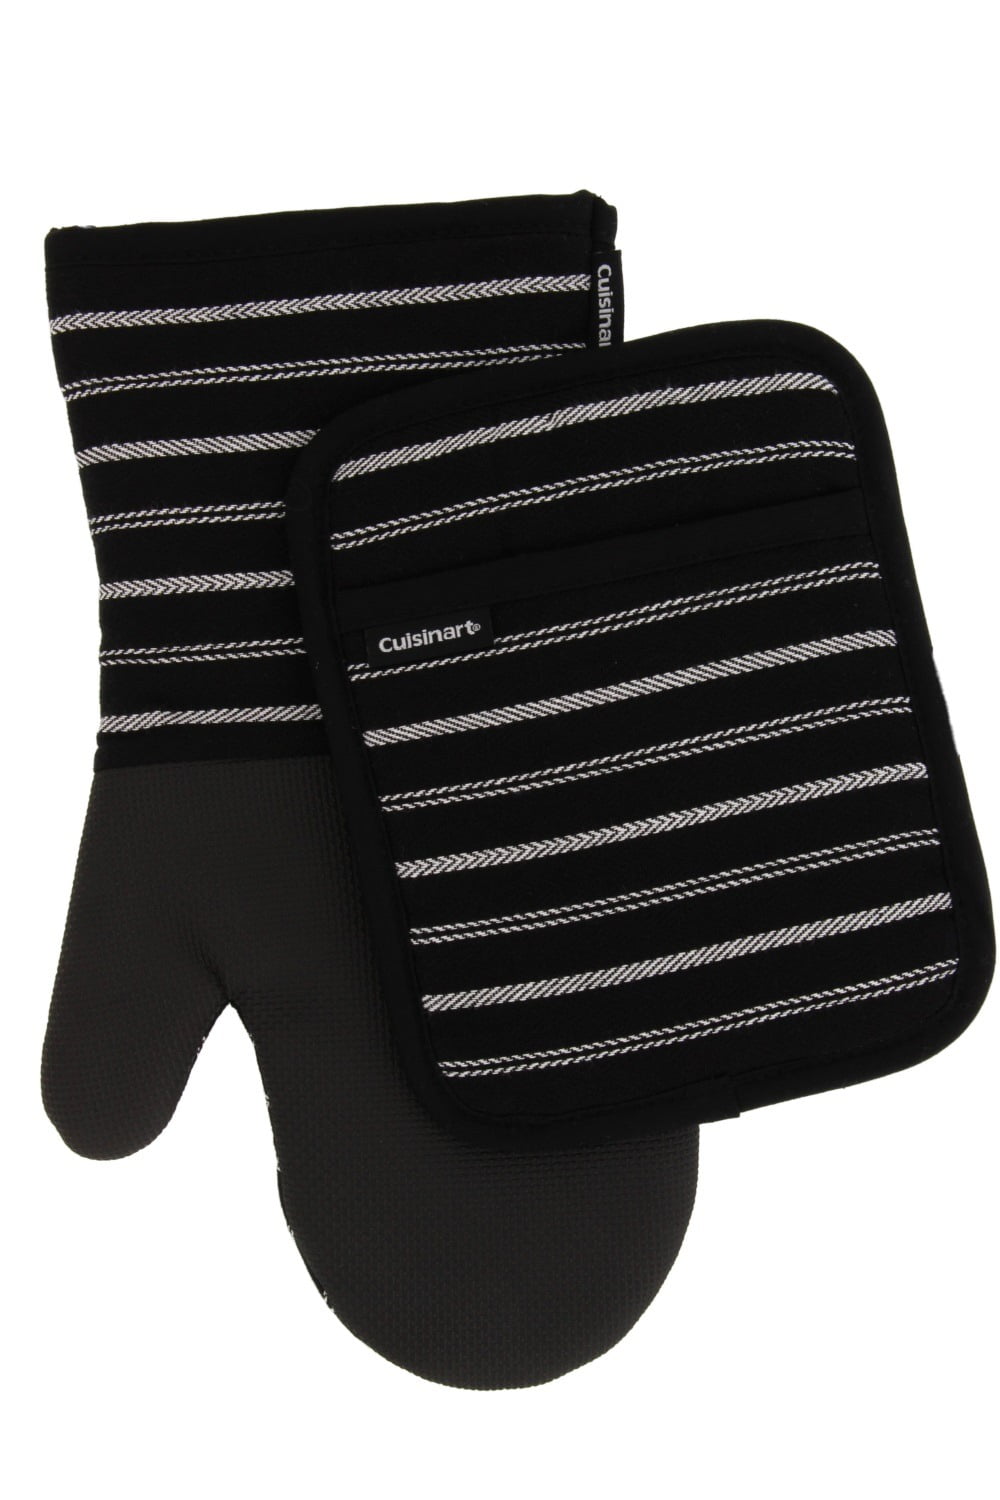 Cuisinart Neoprene Mini Oven Mitts, 2pk - Heat Resistant Pot Holders to  Protect Hands with Non-Slip Grip and Hanging Loop - Ideal for Handling Hot